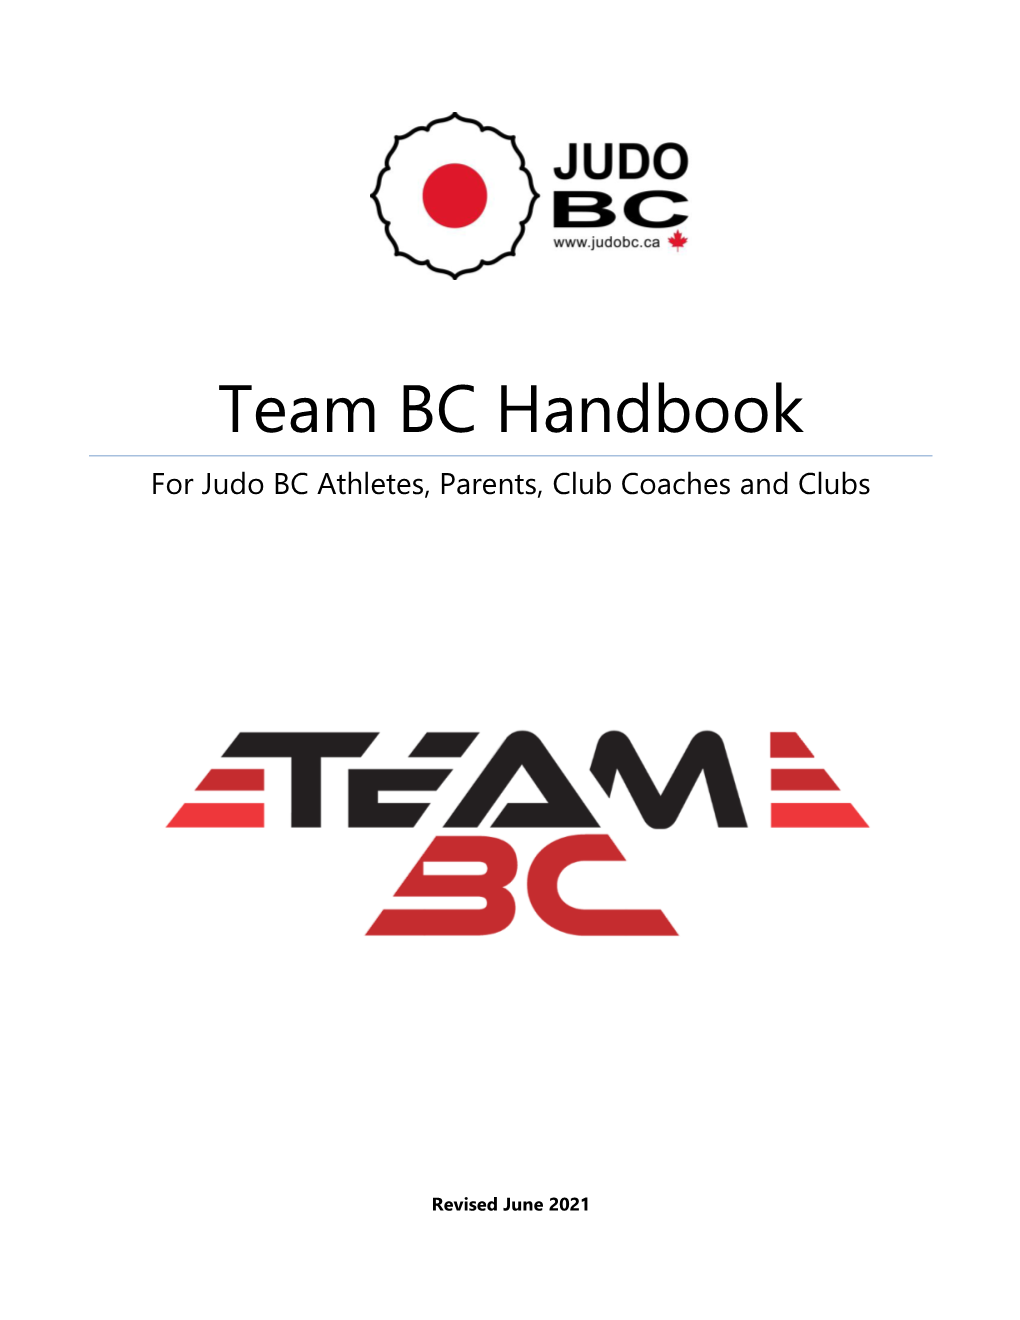 Team BC Handbook for Judo BC Athletes, Parents, Club Coaches and Clubs